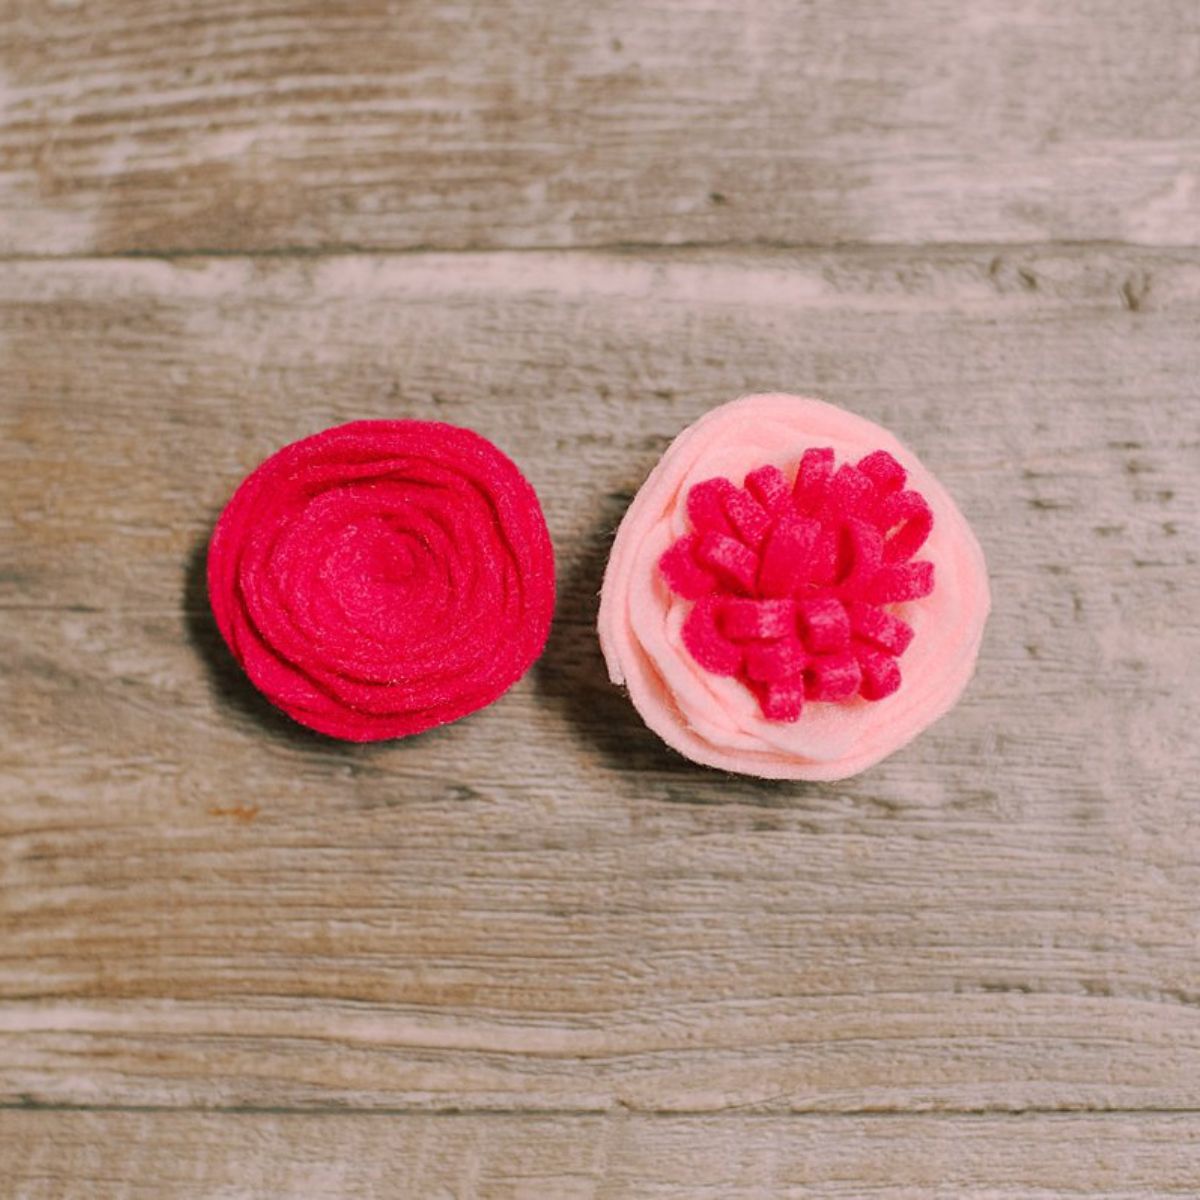 Two types of felt rose flowers sitting side by side on a wood surface.